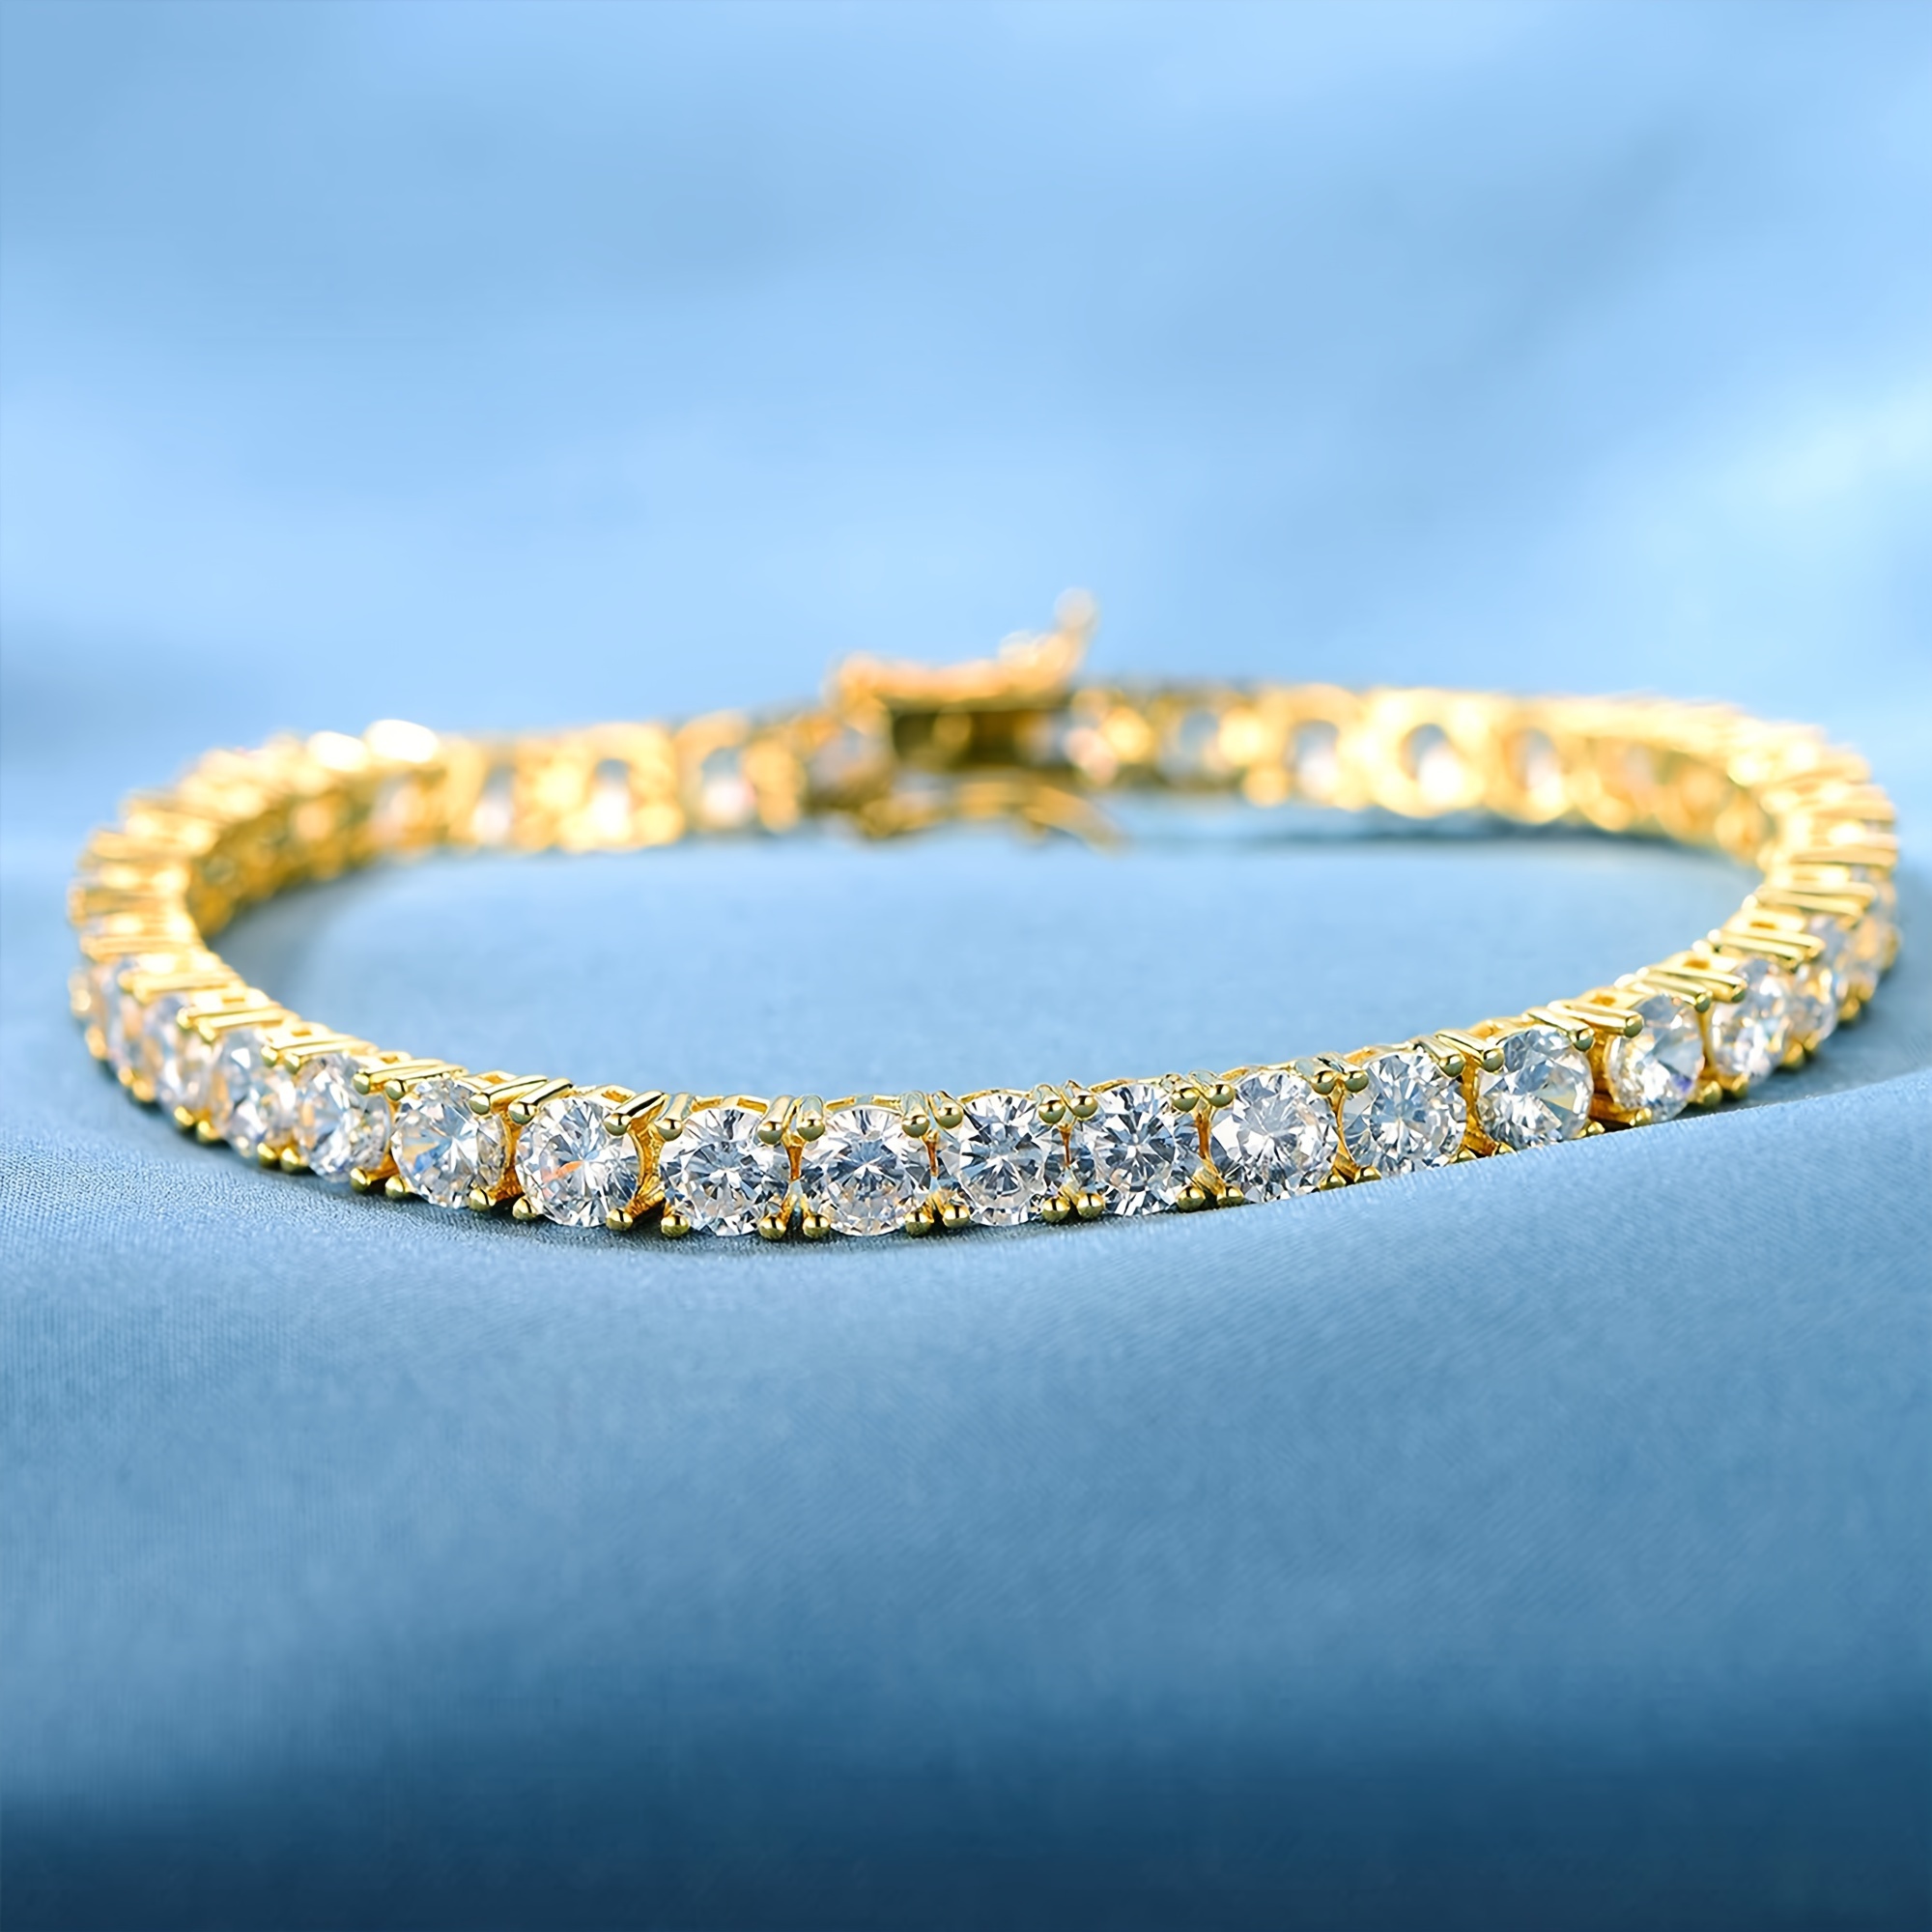 

18k Gold Plated 4-prong Inlaid 4.0mm White Zirconia Golden Classic Tennis Bracelet 6.5/7/7.5/8/8.5 Inches, Unisex, Father's Day, Mother's Day, Birthday, Holiday, Anniversary Gift